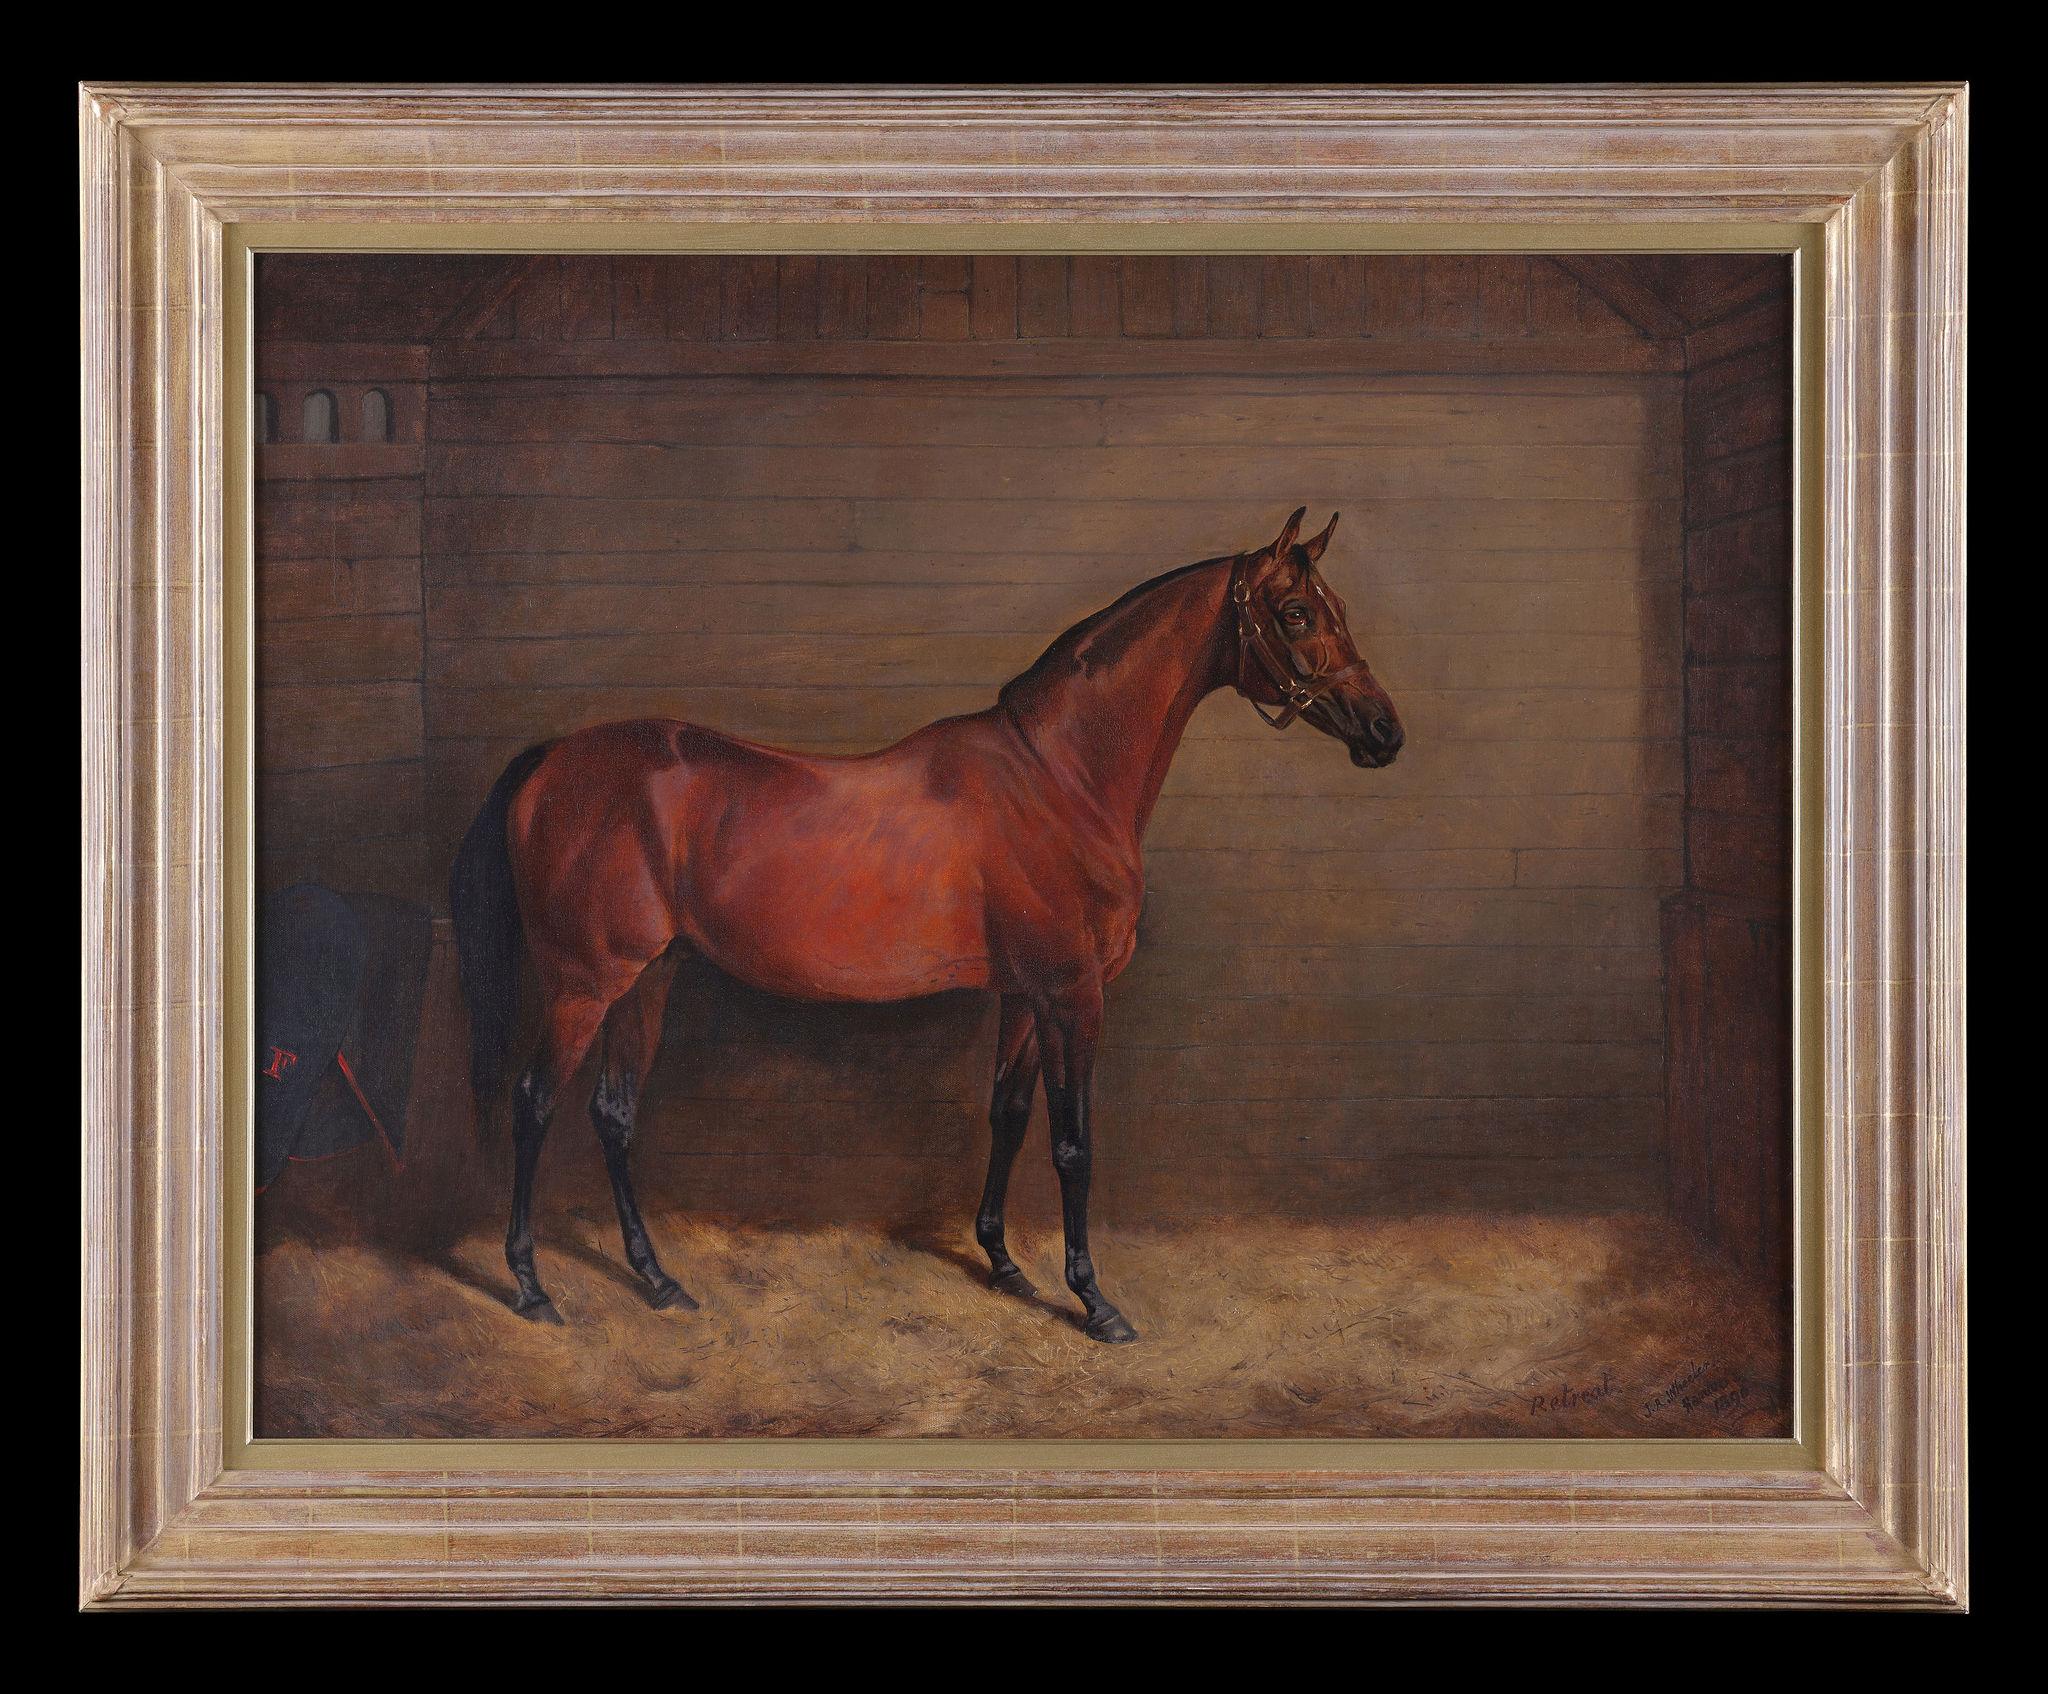 'Retreat' A Chestnut Horse in a Stable,  an antique oil painting